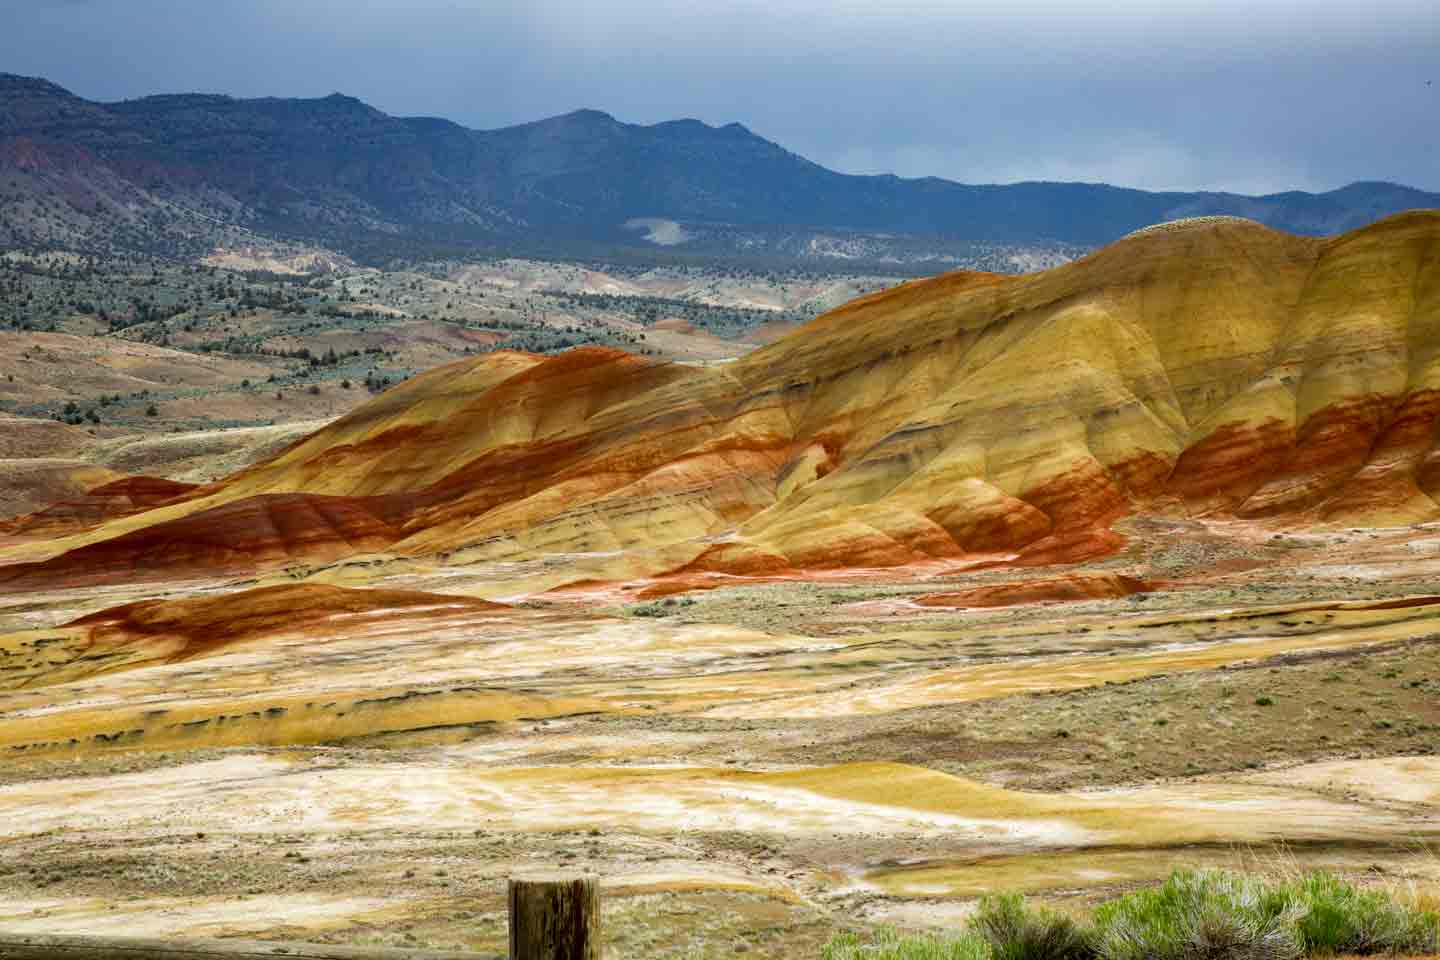 Hills with red, orange, and yellow streaks